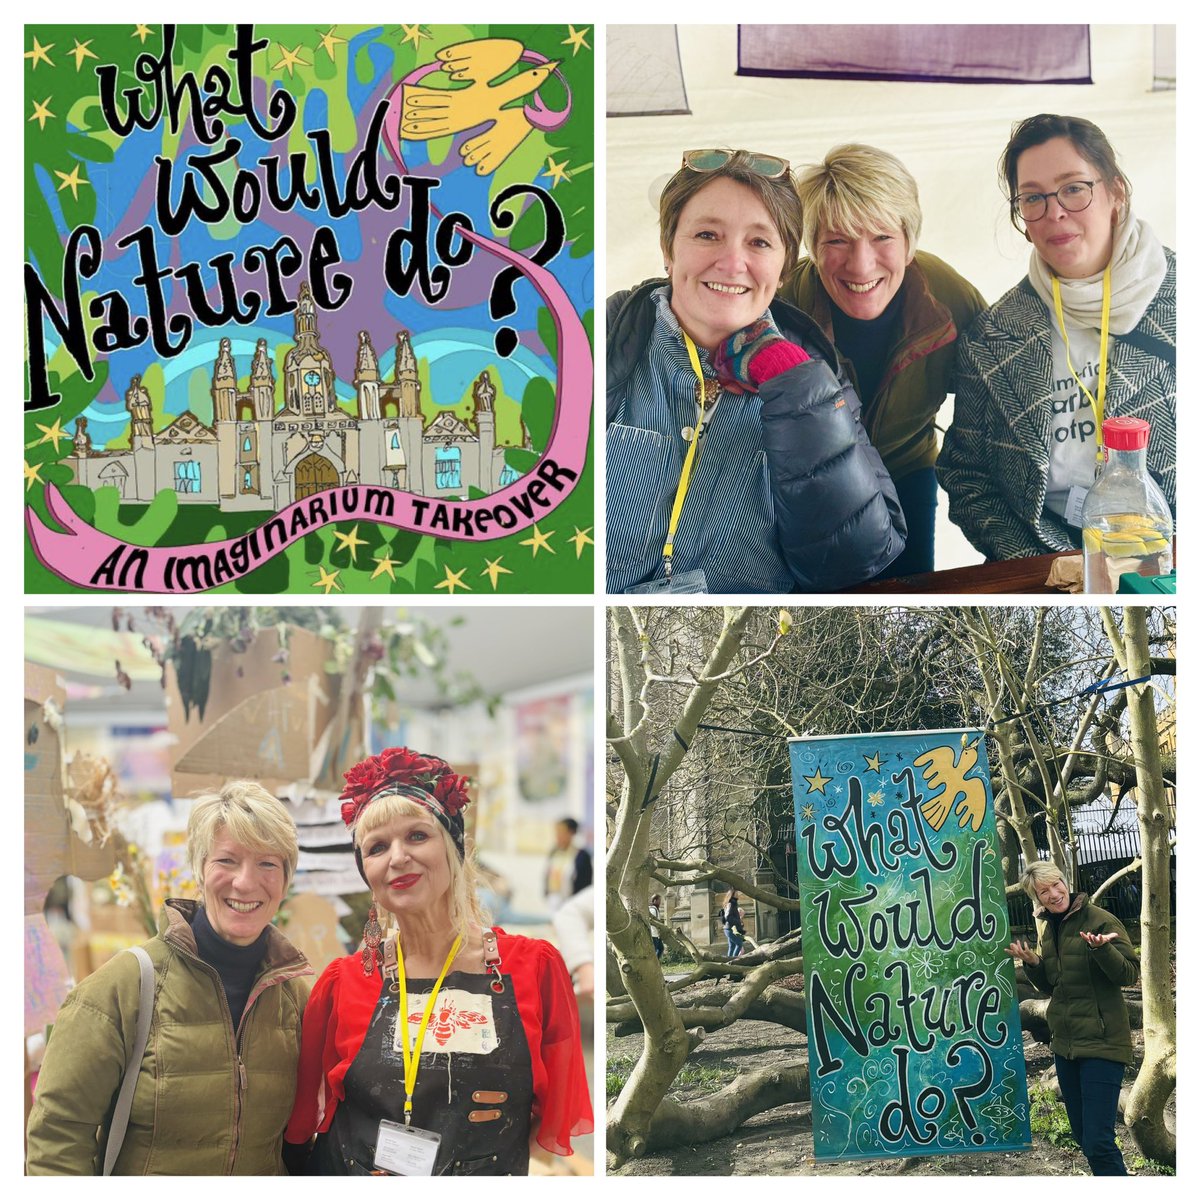 Radical Nature take-over of #KingsCollege this weekend. Changing from “do not walk on the grass” to “let’s reimagine a future together with Nature”. Congratulations to the organisers and volunteers. 2300 visitors to this creative event, Repair Cafes, soundscape, art, communities